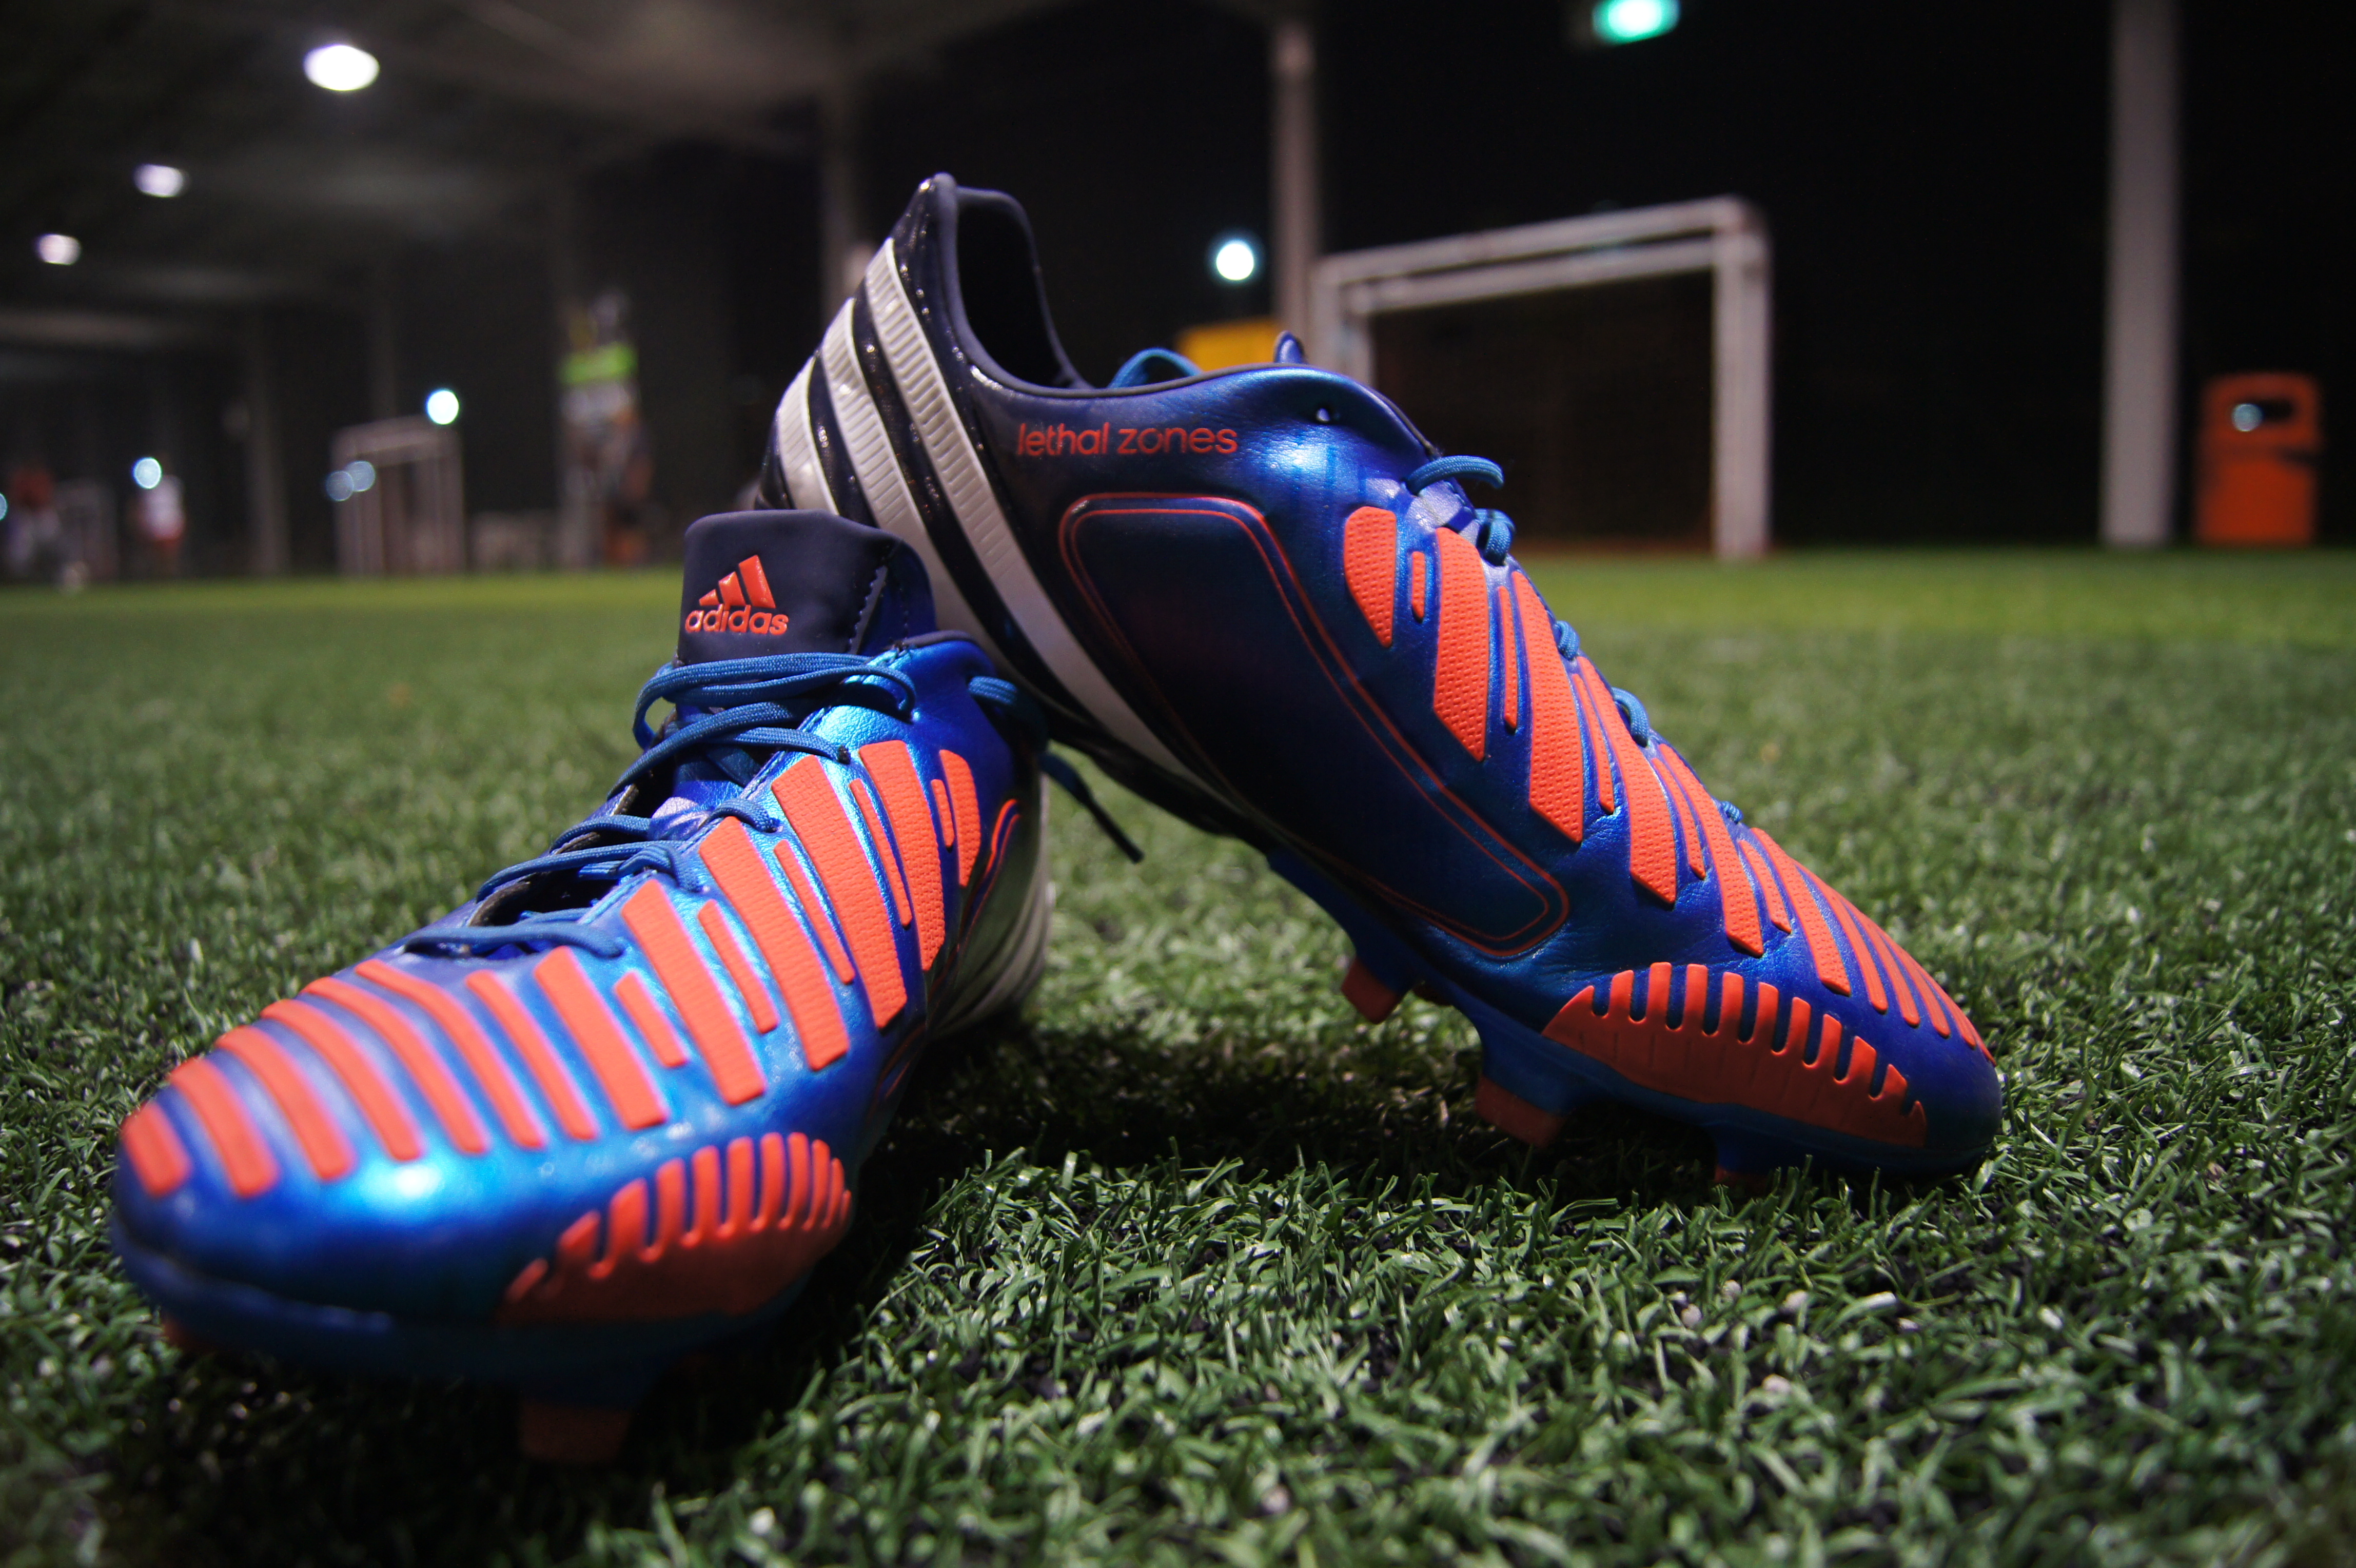 lethal zones